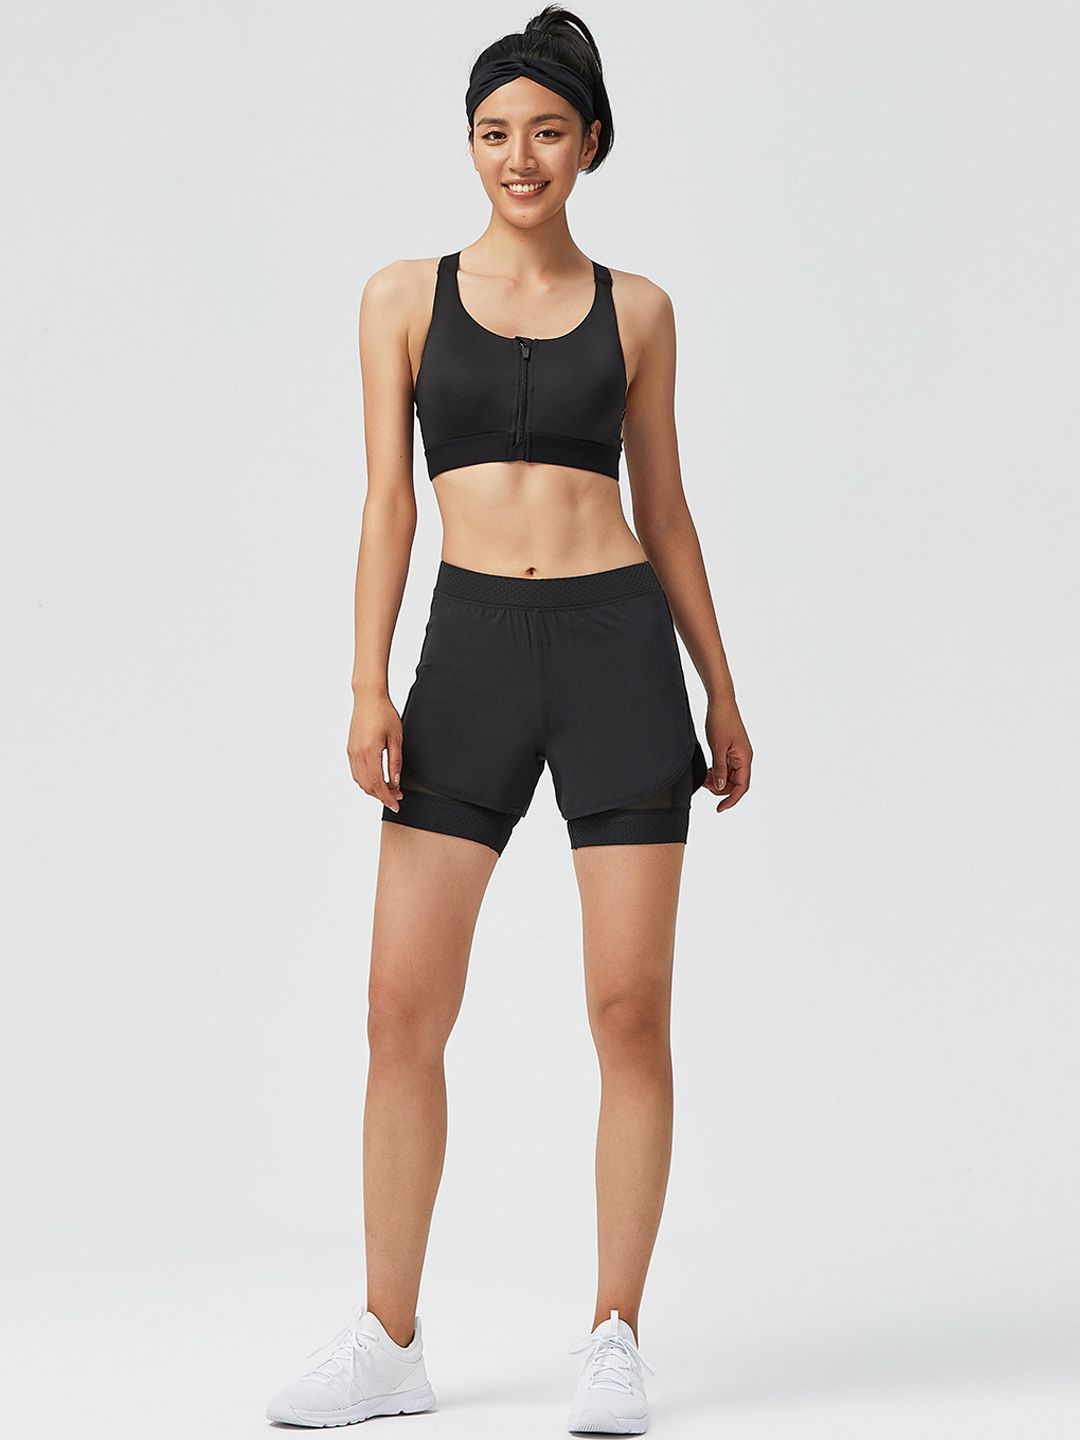 Domyos By Decathlon Women Black Training or Gym Hot Pants Shorts Price in India